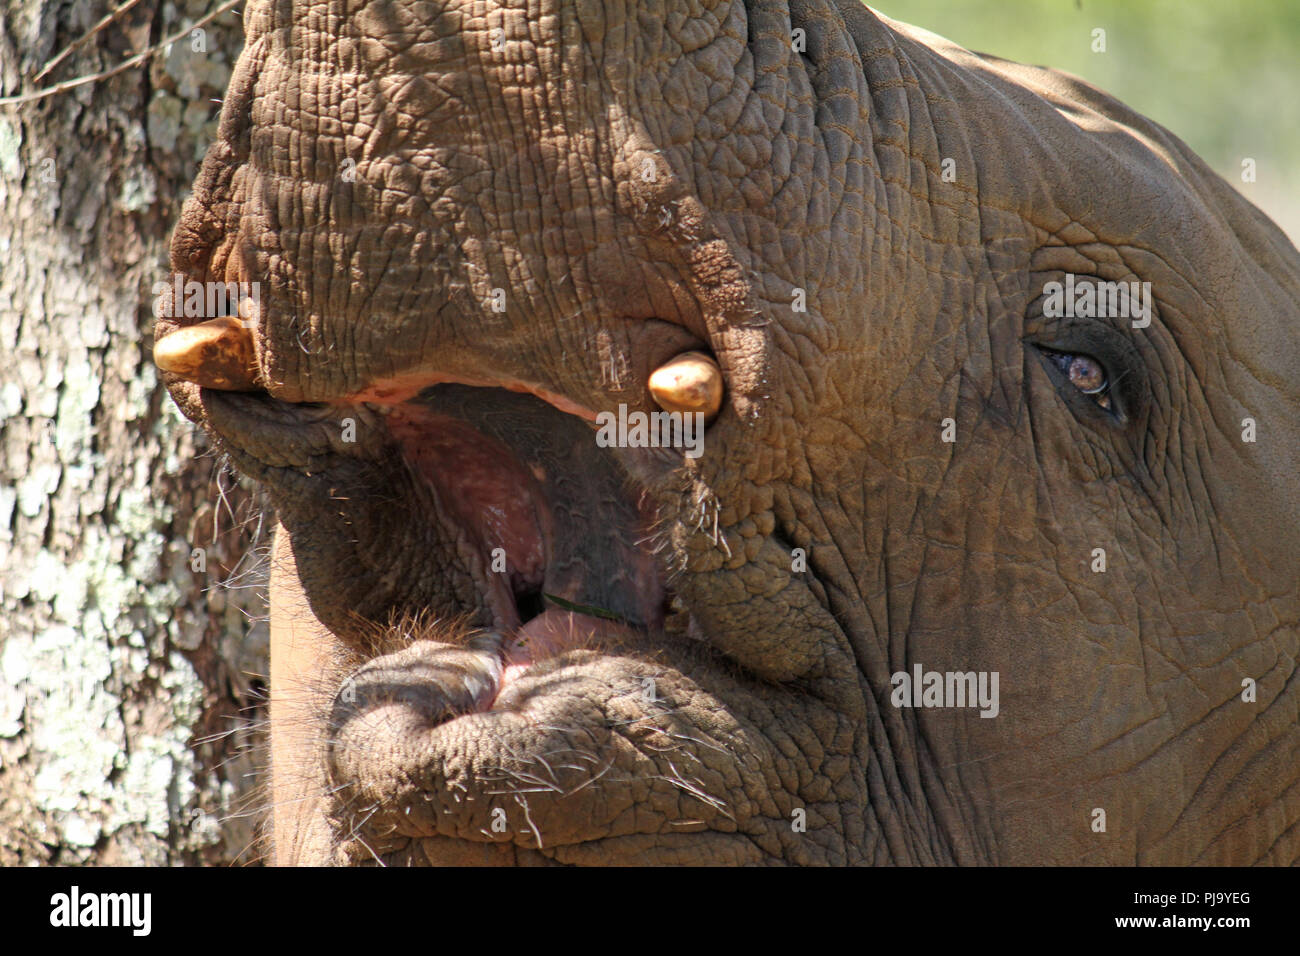 Getting close to a young elephant in South Africa Stock Photo